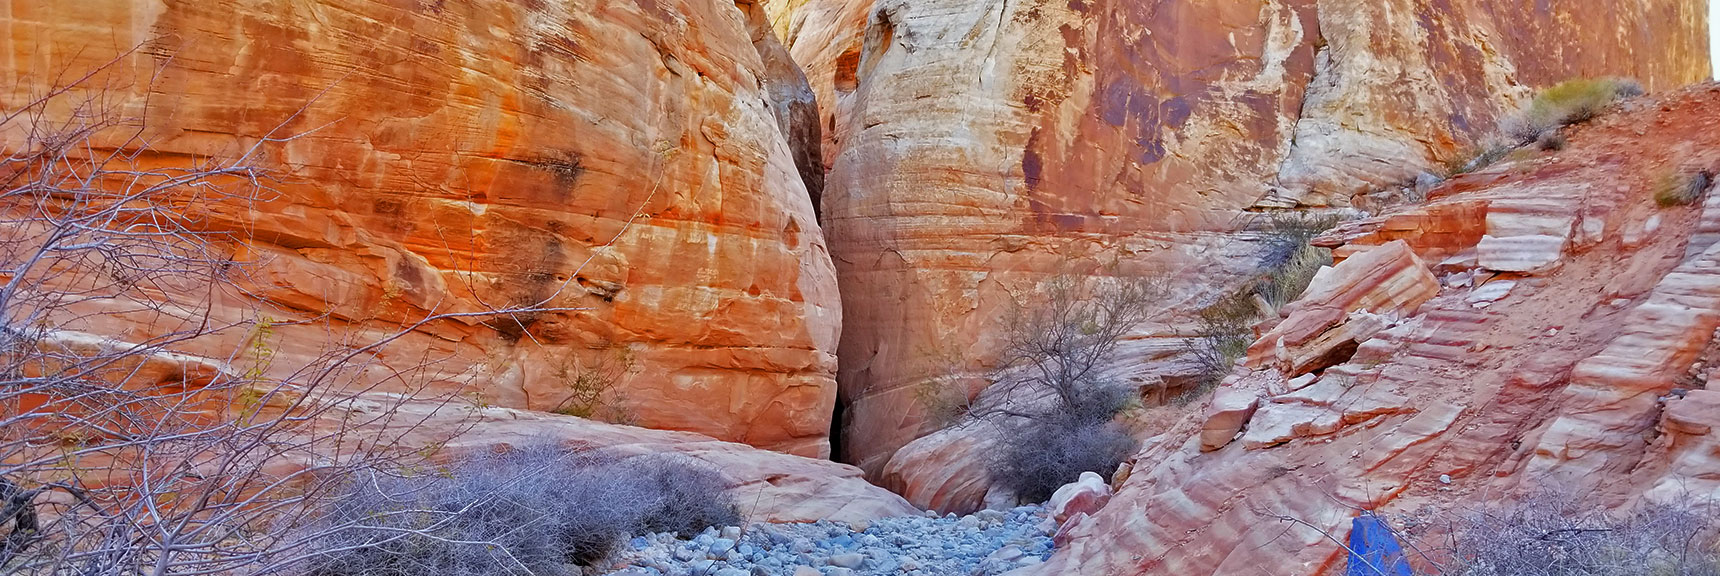 Looking Back Toward the Slot Canyon Entrance on White Domes Loop in Valley of Fire State Park, Nevada